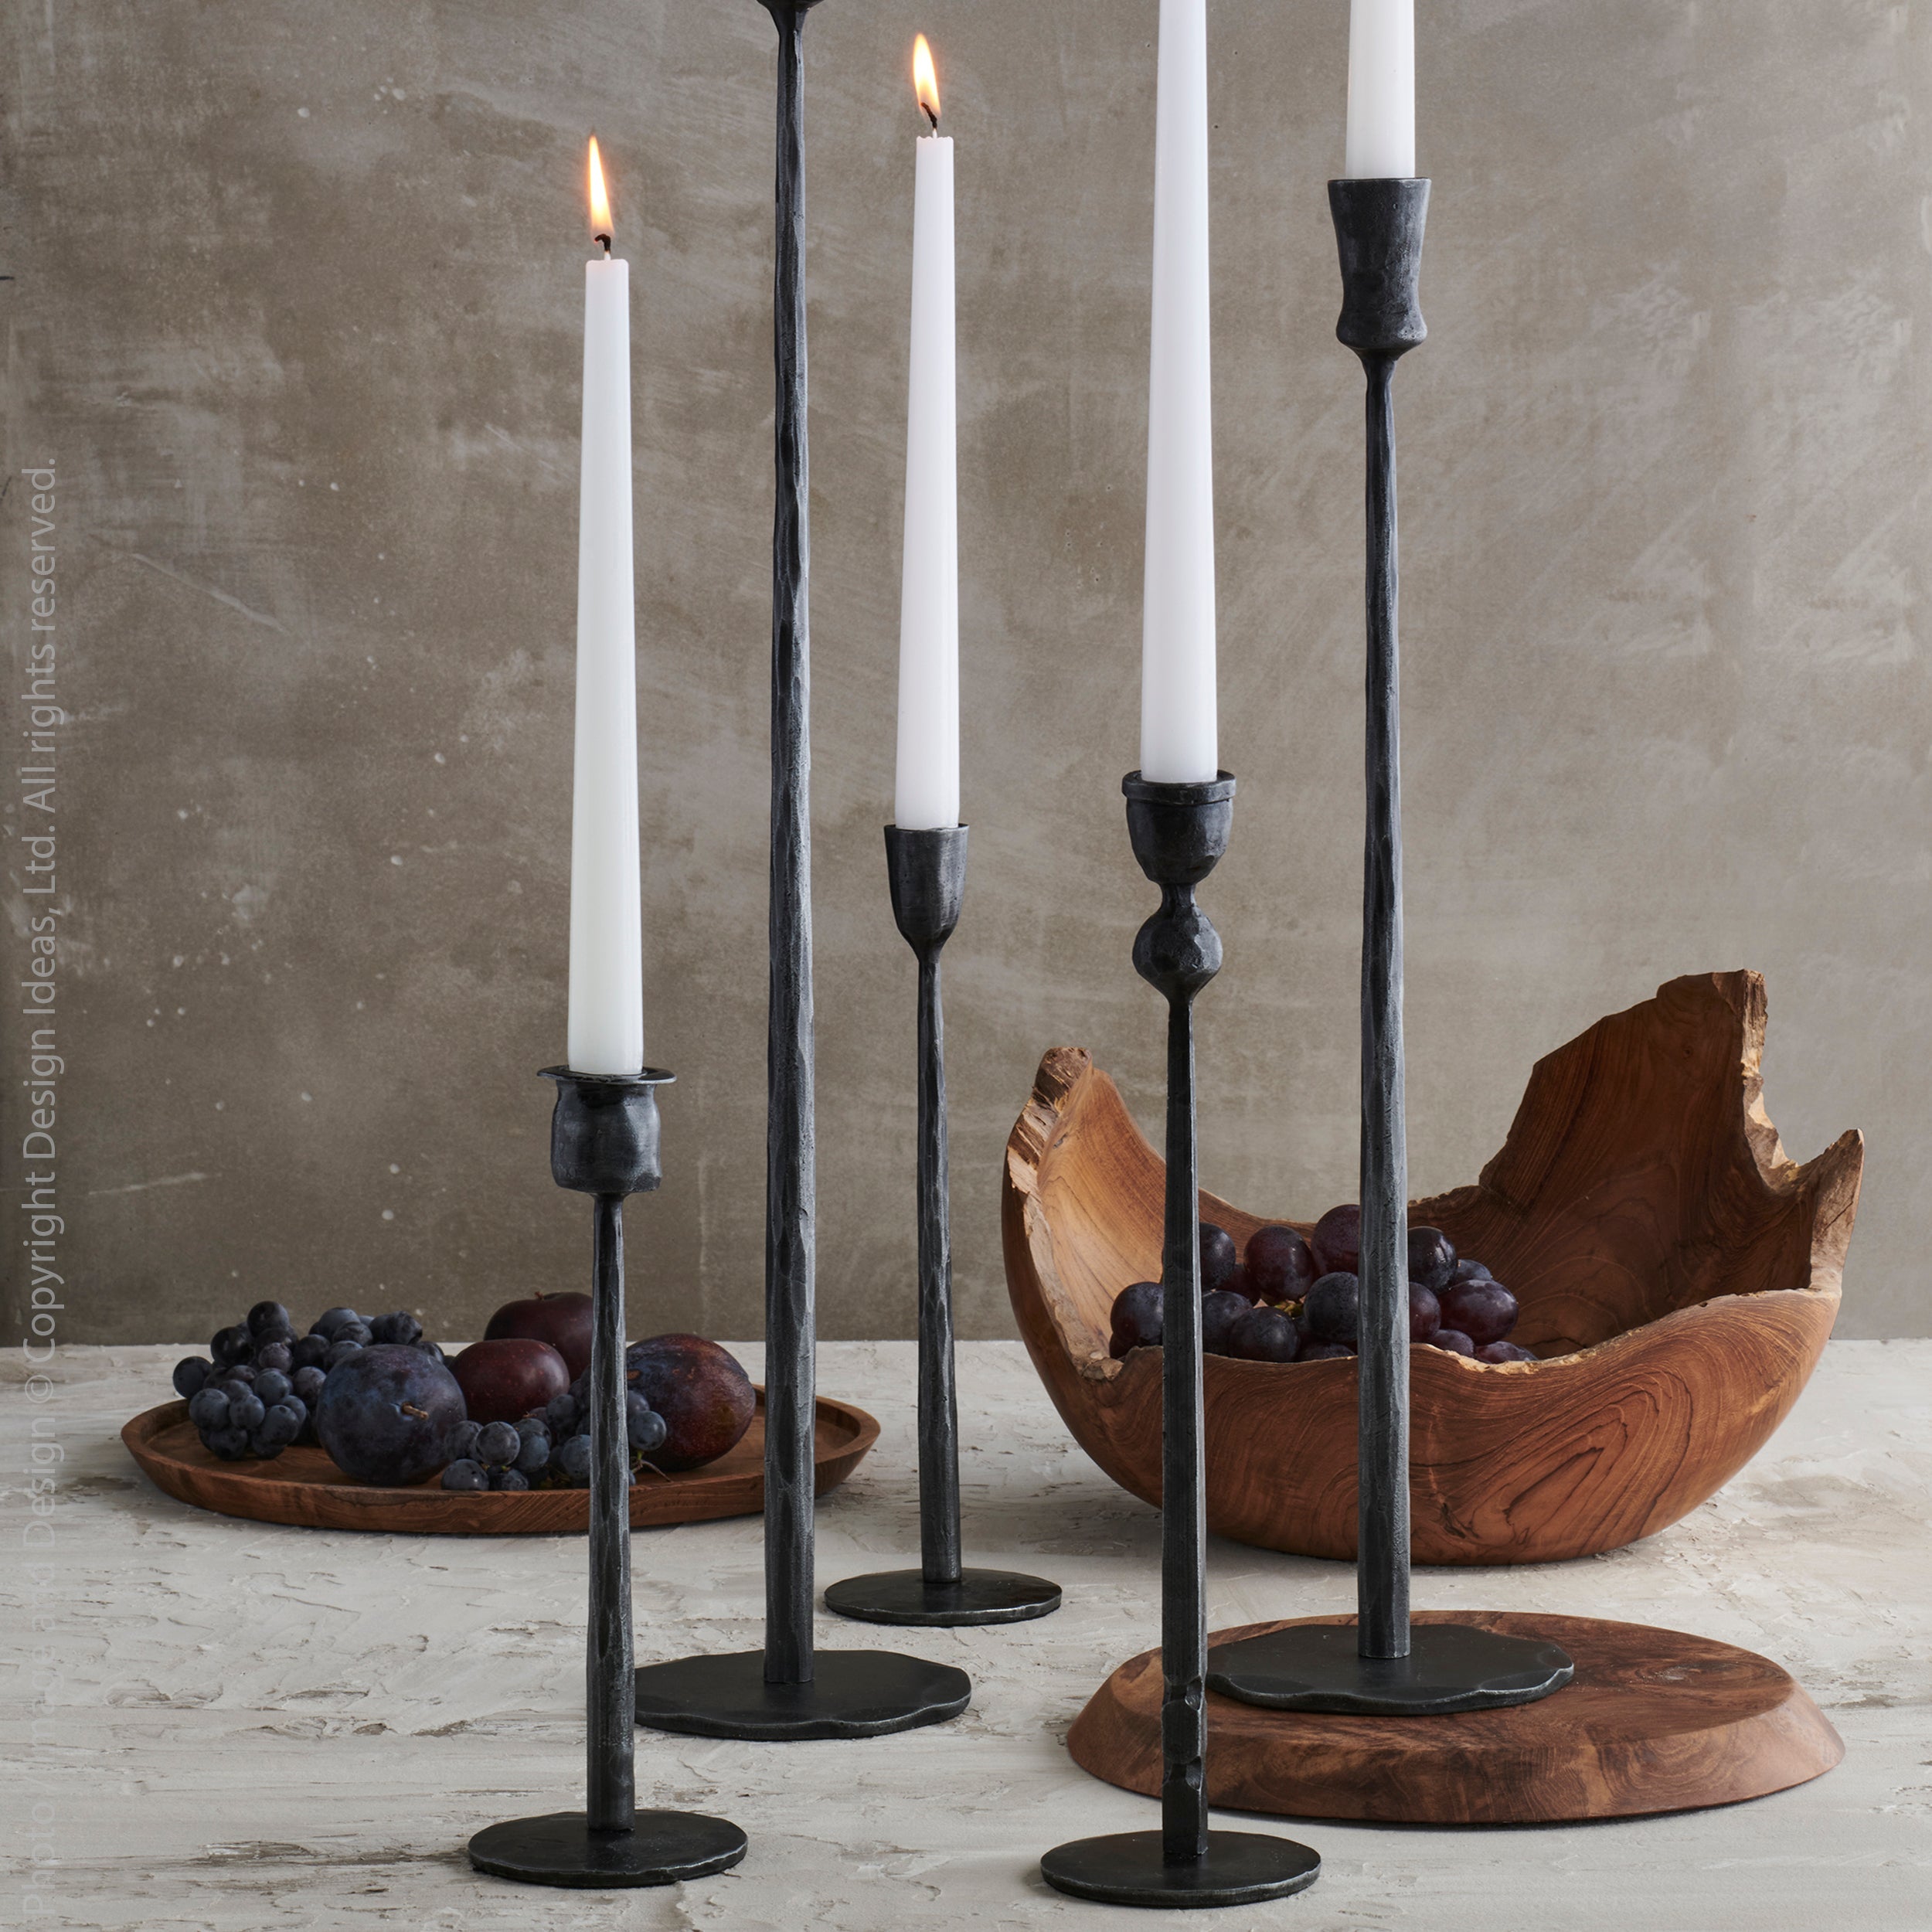 Jasper Iron Taper Candle Holder (12.4 Inch) Black Color | Image 2 | From the Jasper Collection | Exquisitely created with natural iron for long lasting use | Available in copper color | texxture home